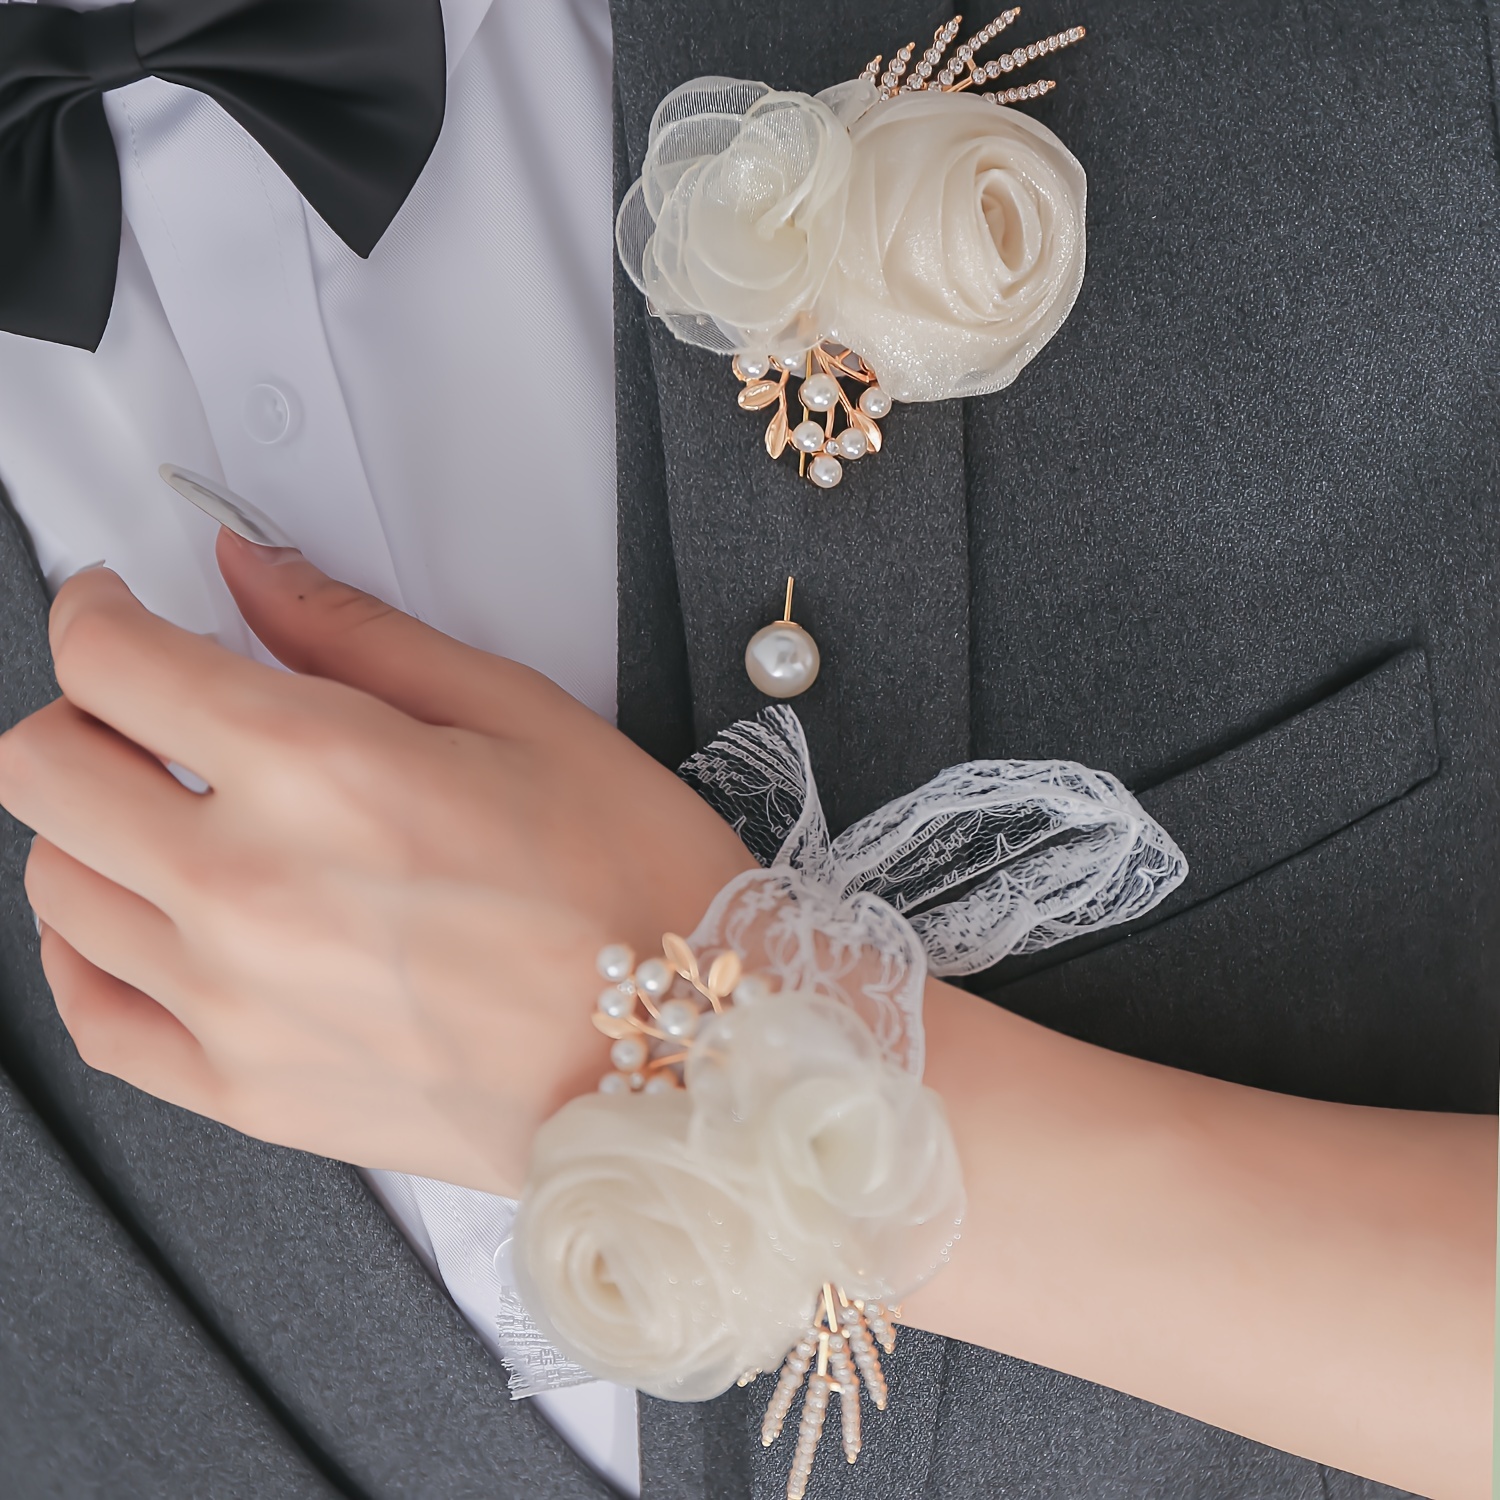 Silk Roses Wrist Corsage Bracelets Wedding Boutonnieres Bridesmaid Groom  White Blue Hand Flowers Marriage Prom Accessories - AliExpress